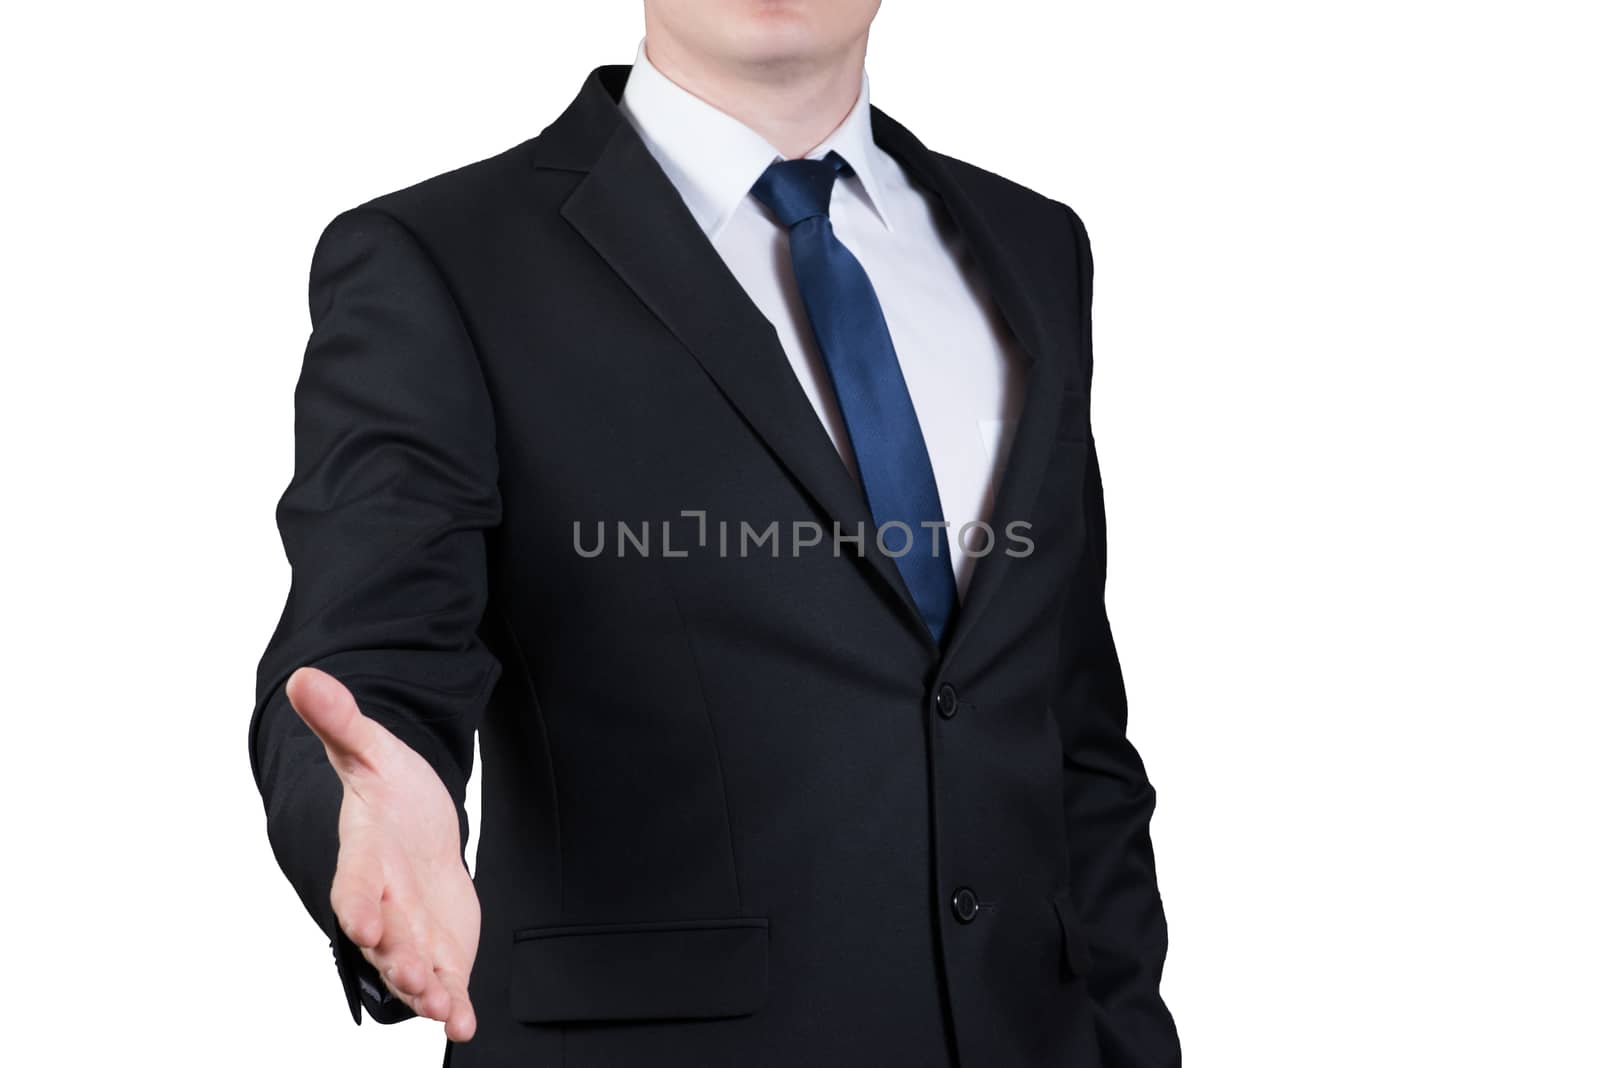 successful man extending hand to shake isolated on white background